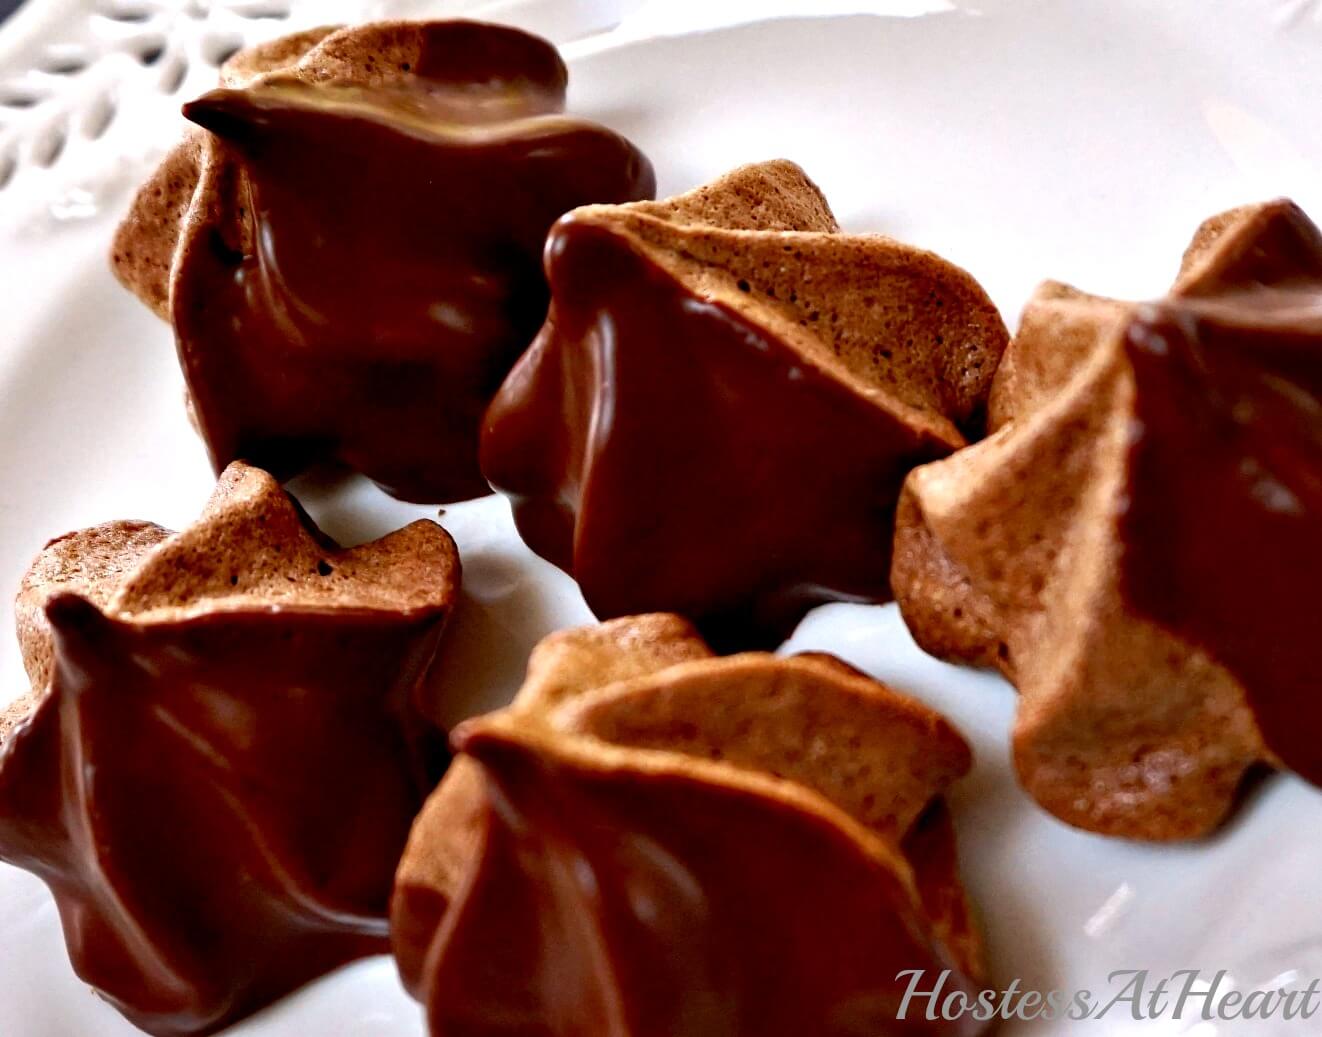 Chocolate Meringue Stars dipped in chocolate ganache sitting on a white plate